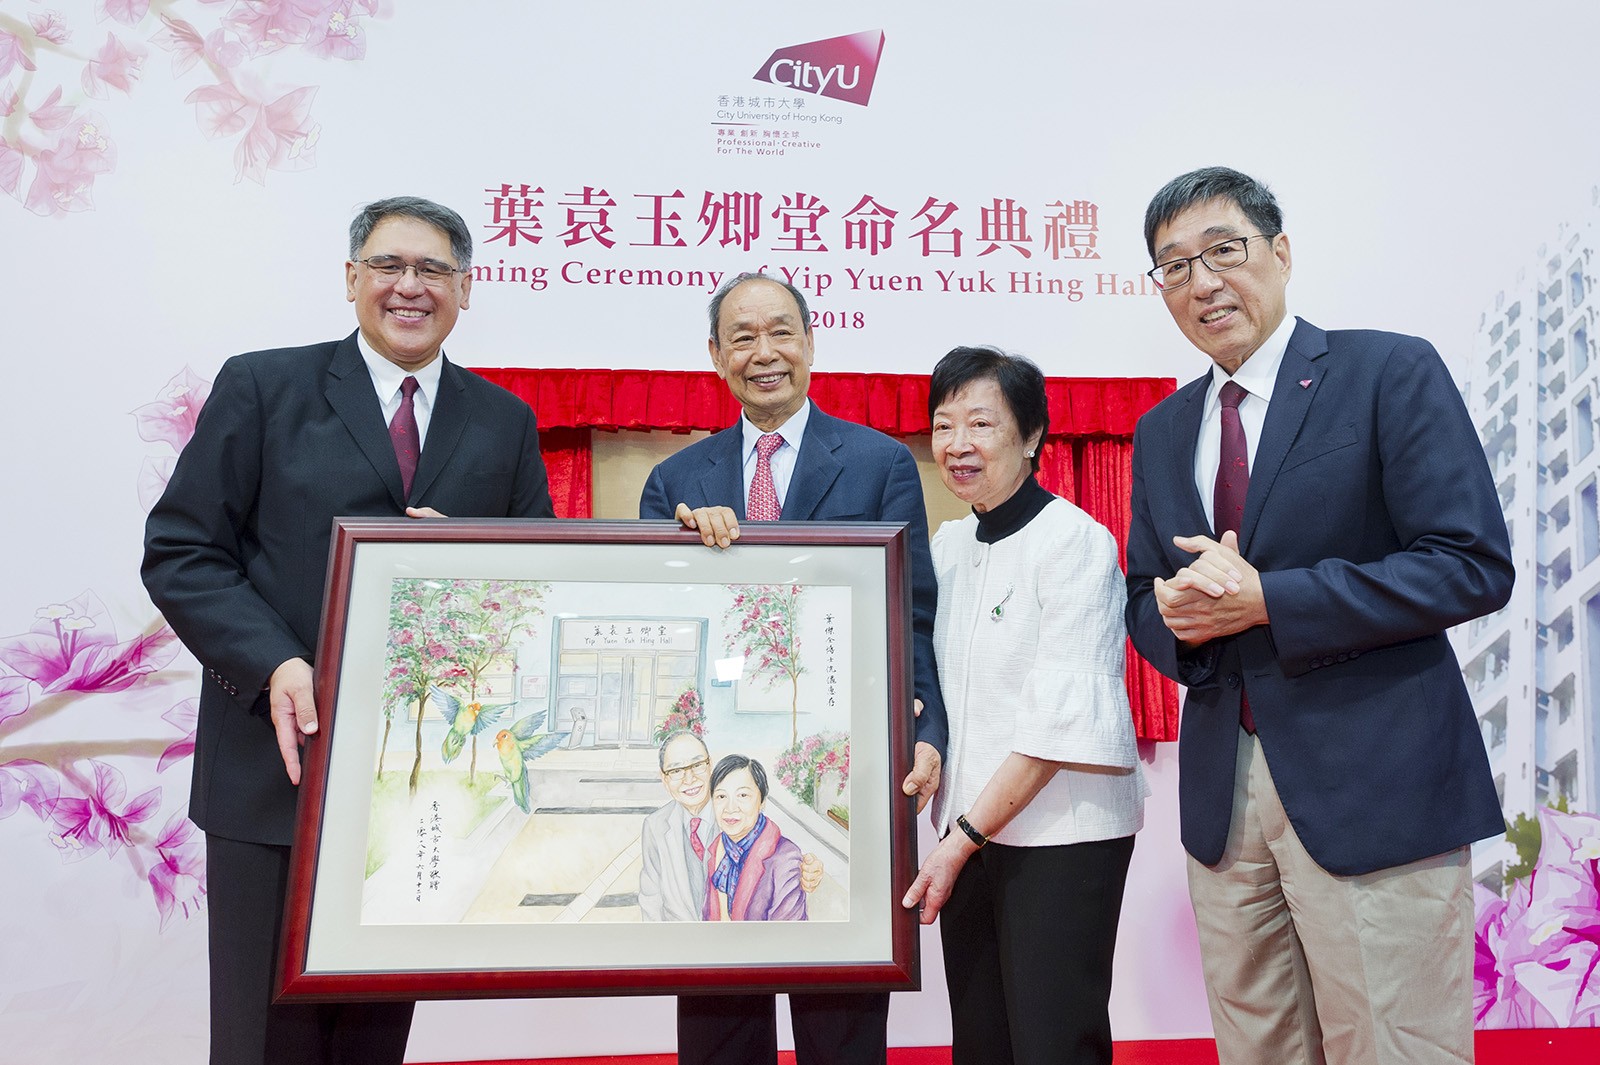 Mr Huang (first from left) and Professor Kuo (first from right) present a souvenir to Dr Yip and Mrs Yip. 